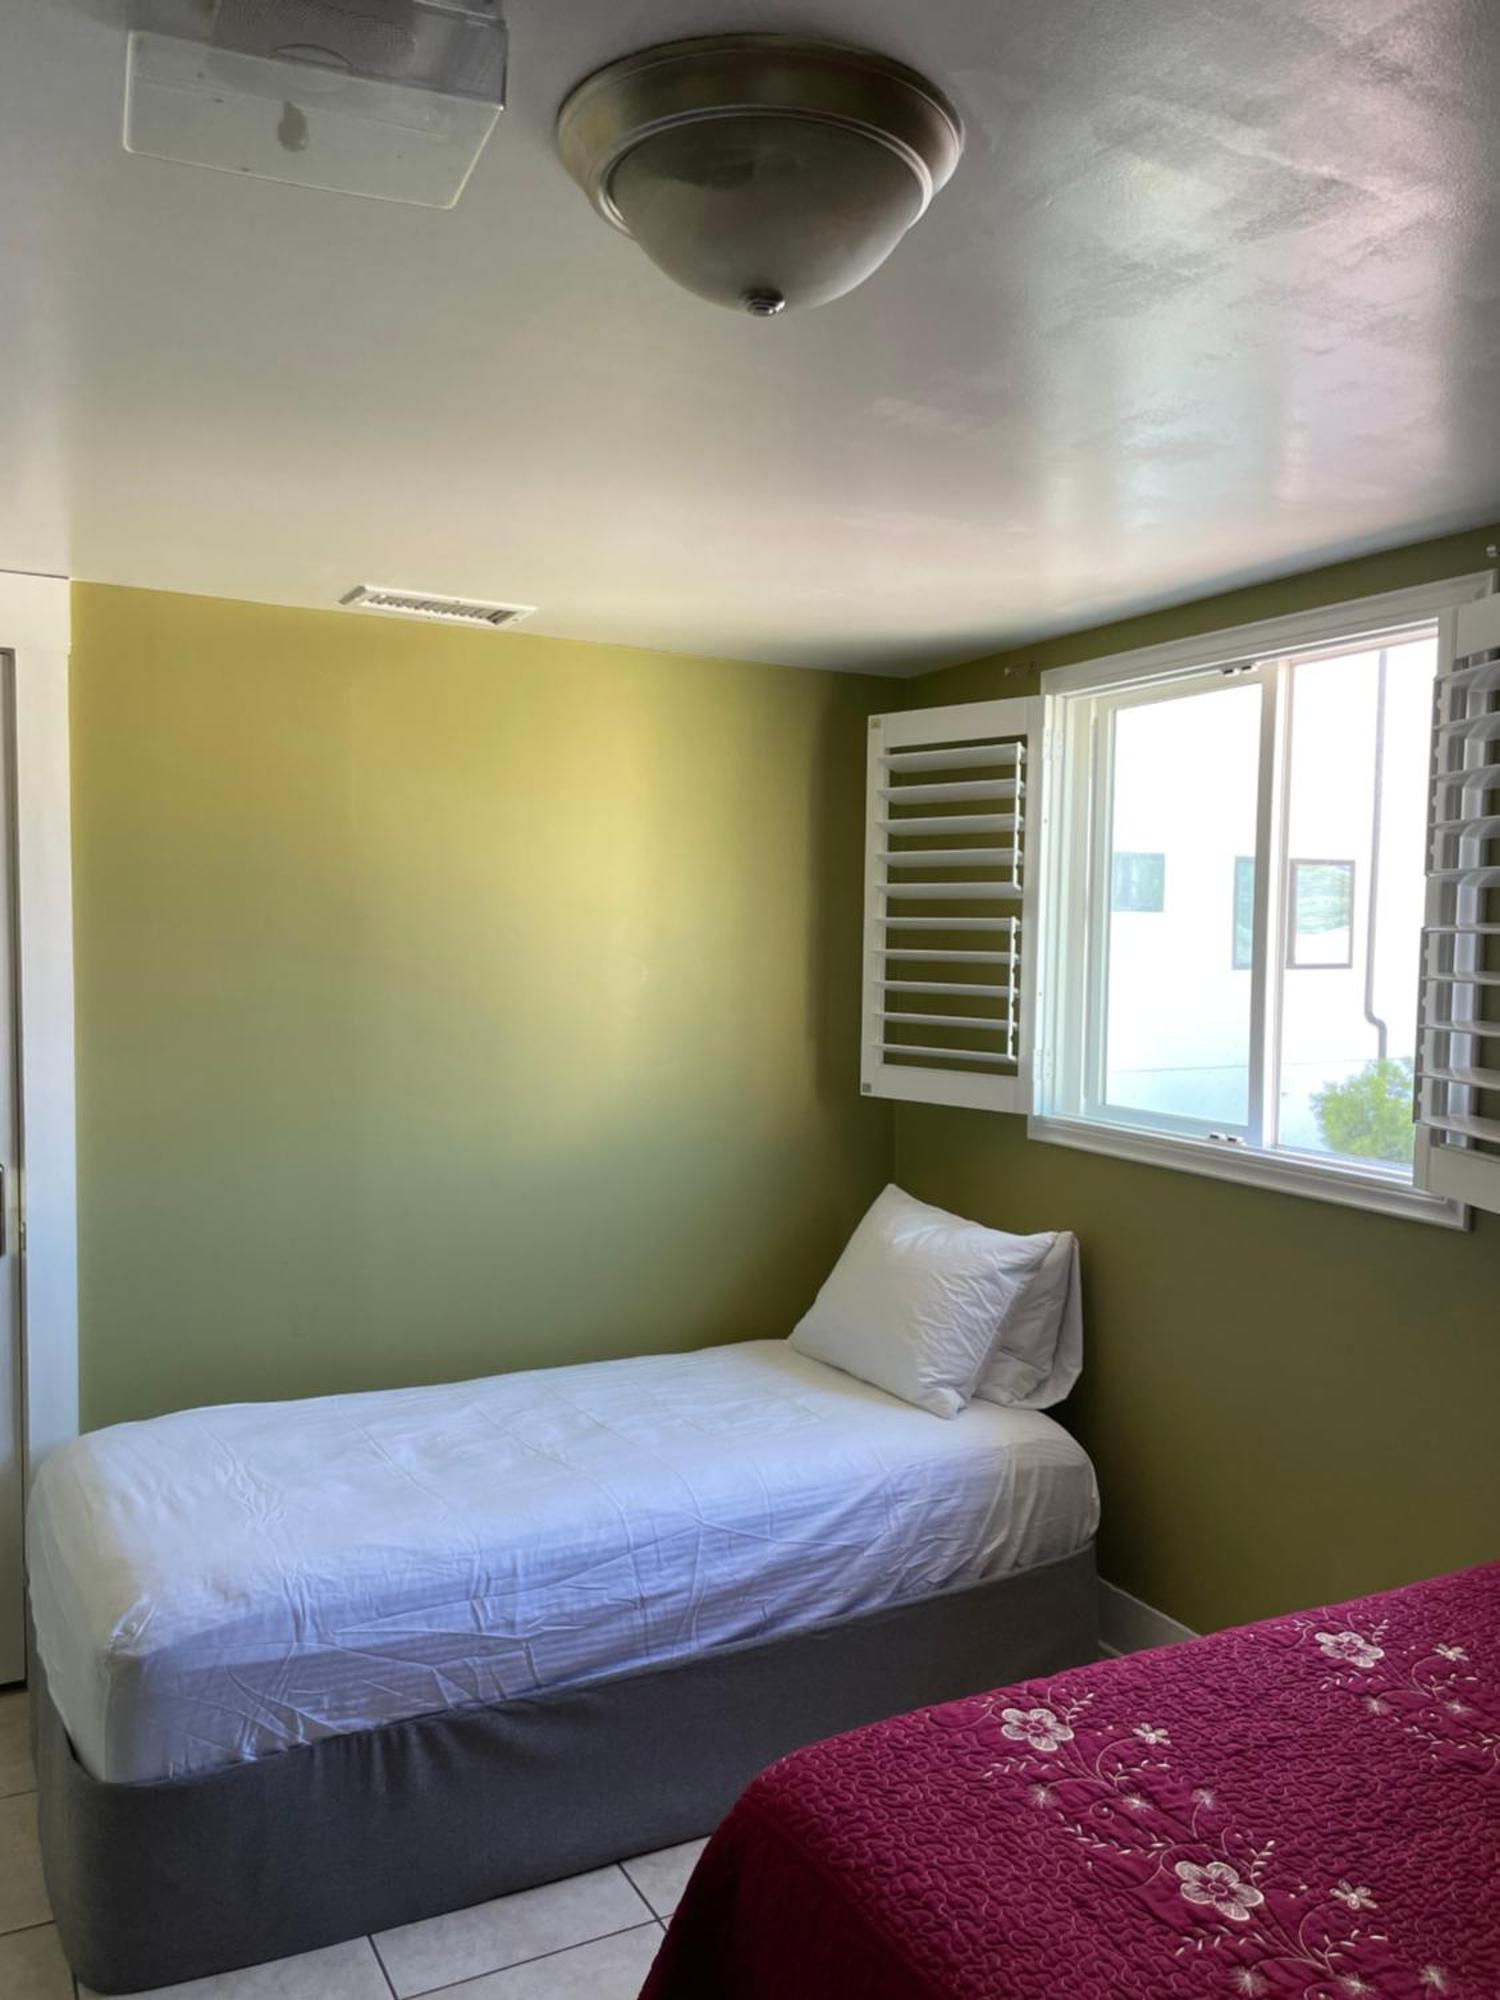 Spacious Private Los Angeles Bedroom With Ac & Wifi & Private Fridge Near Usc The Coliseum Exposition Park Bmo Stadium University Of Southern California Exterior foto